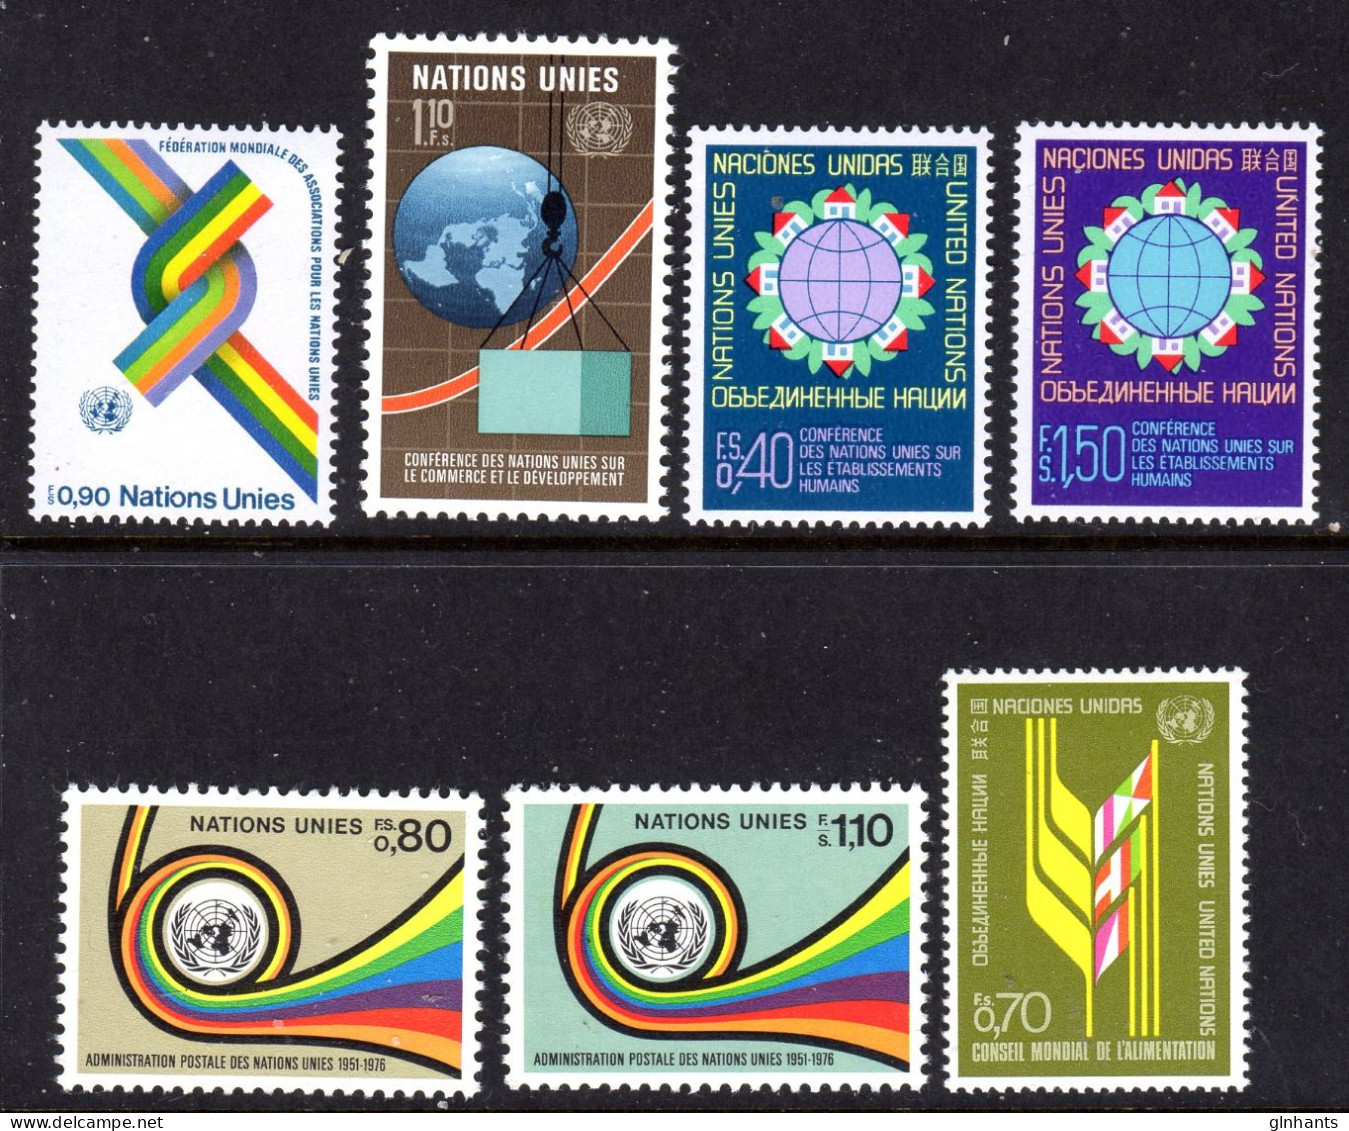 UNITED NATIONS UN GENEVA - 1976 COMPLETE YEAR SET (7V) AS PICTURED FINE MNH ** SG G57-G63 - Nuevos